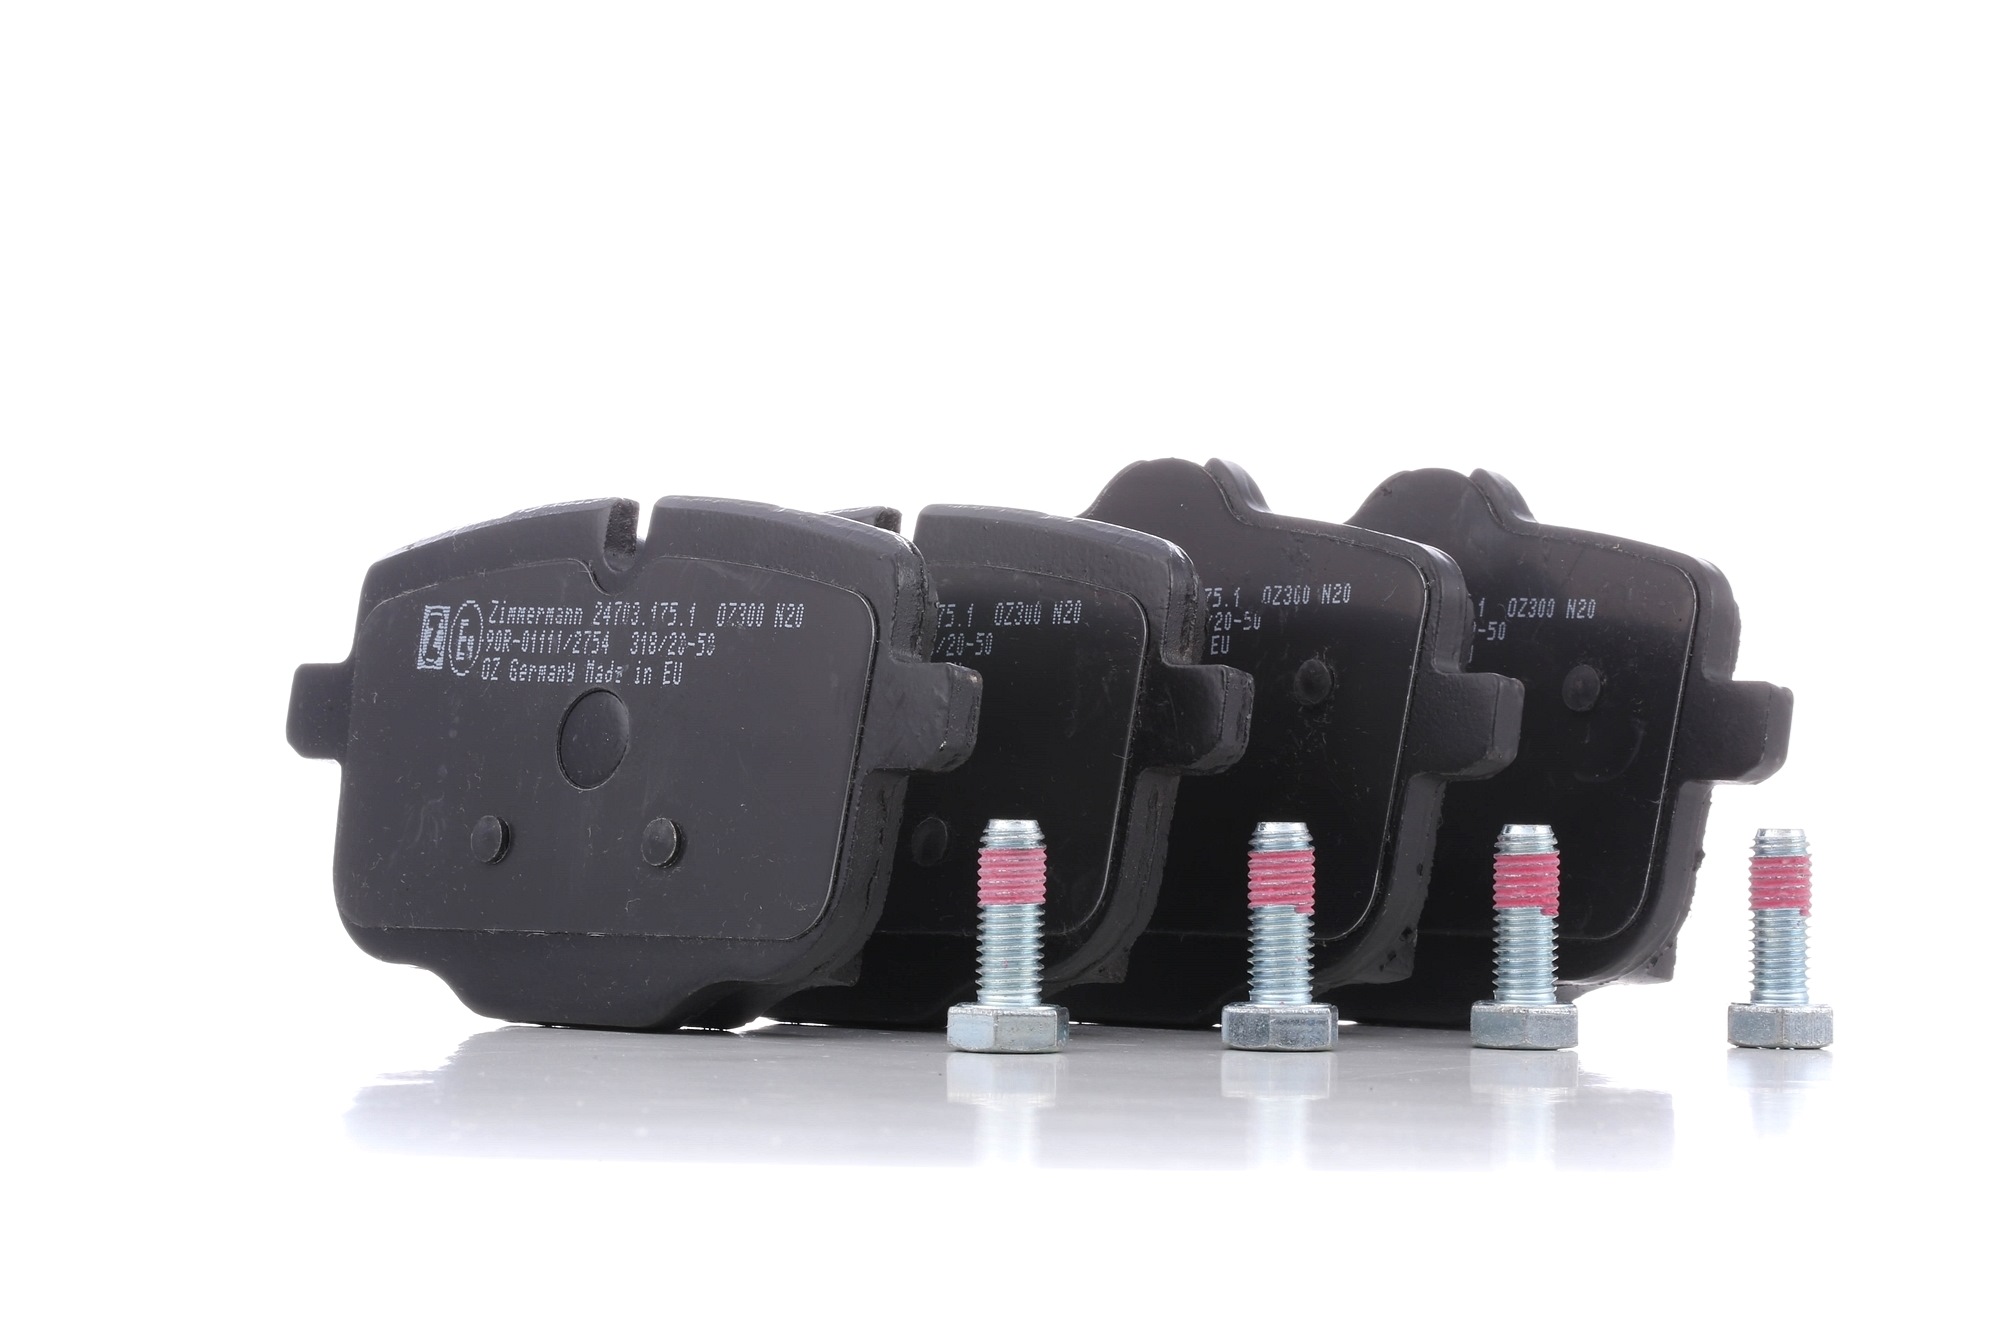 ZIMMERMANN 24703.175.1 Brake pad set prepared for wear indicator, with bolts/screws, Photo corresponds to scope of supply